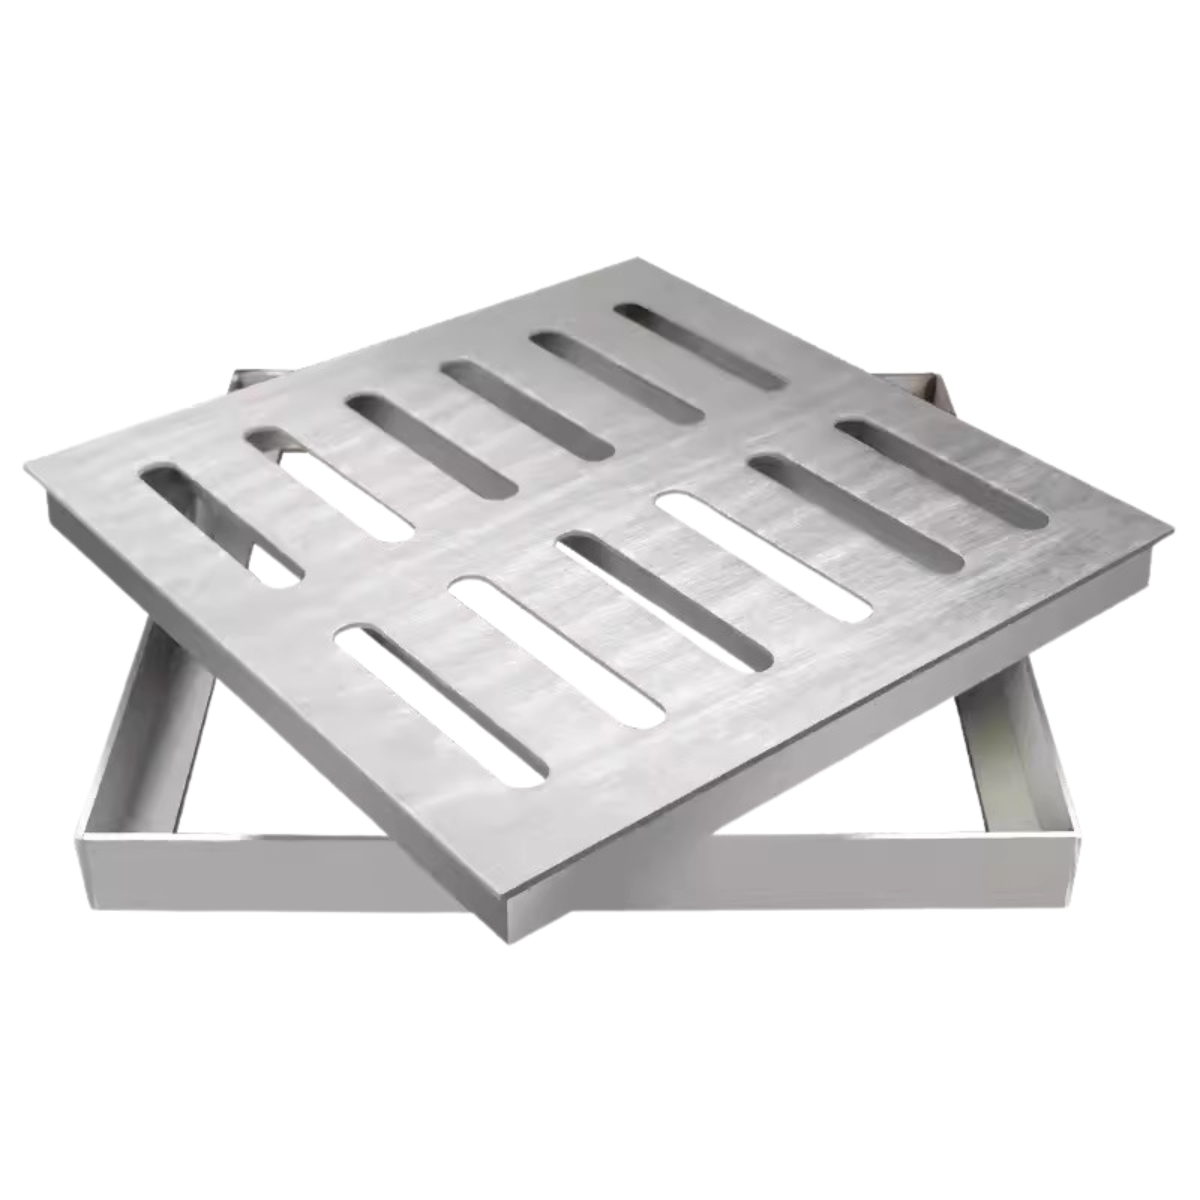 Stainless steel customization Stainless steel rain manhole cover drain grate Gutter cover Square manhole cover